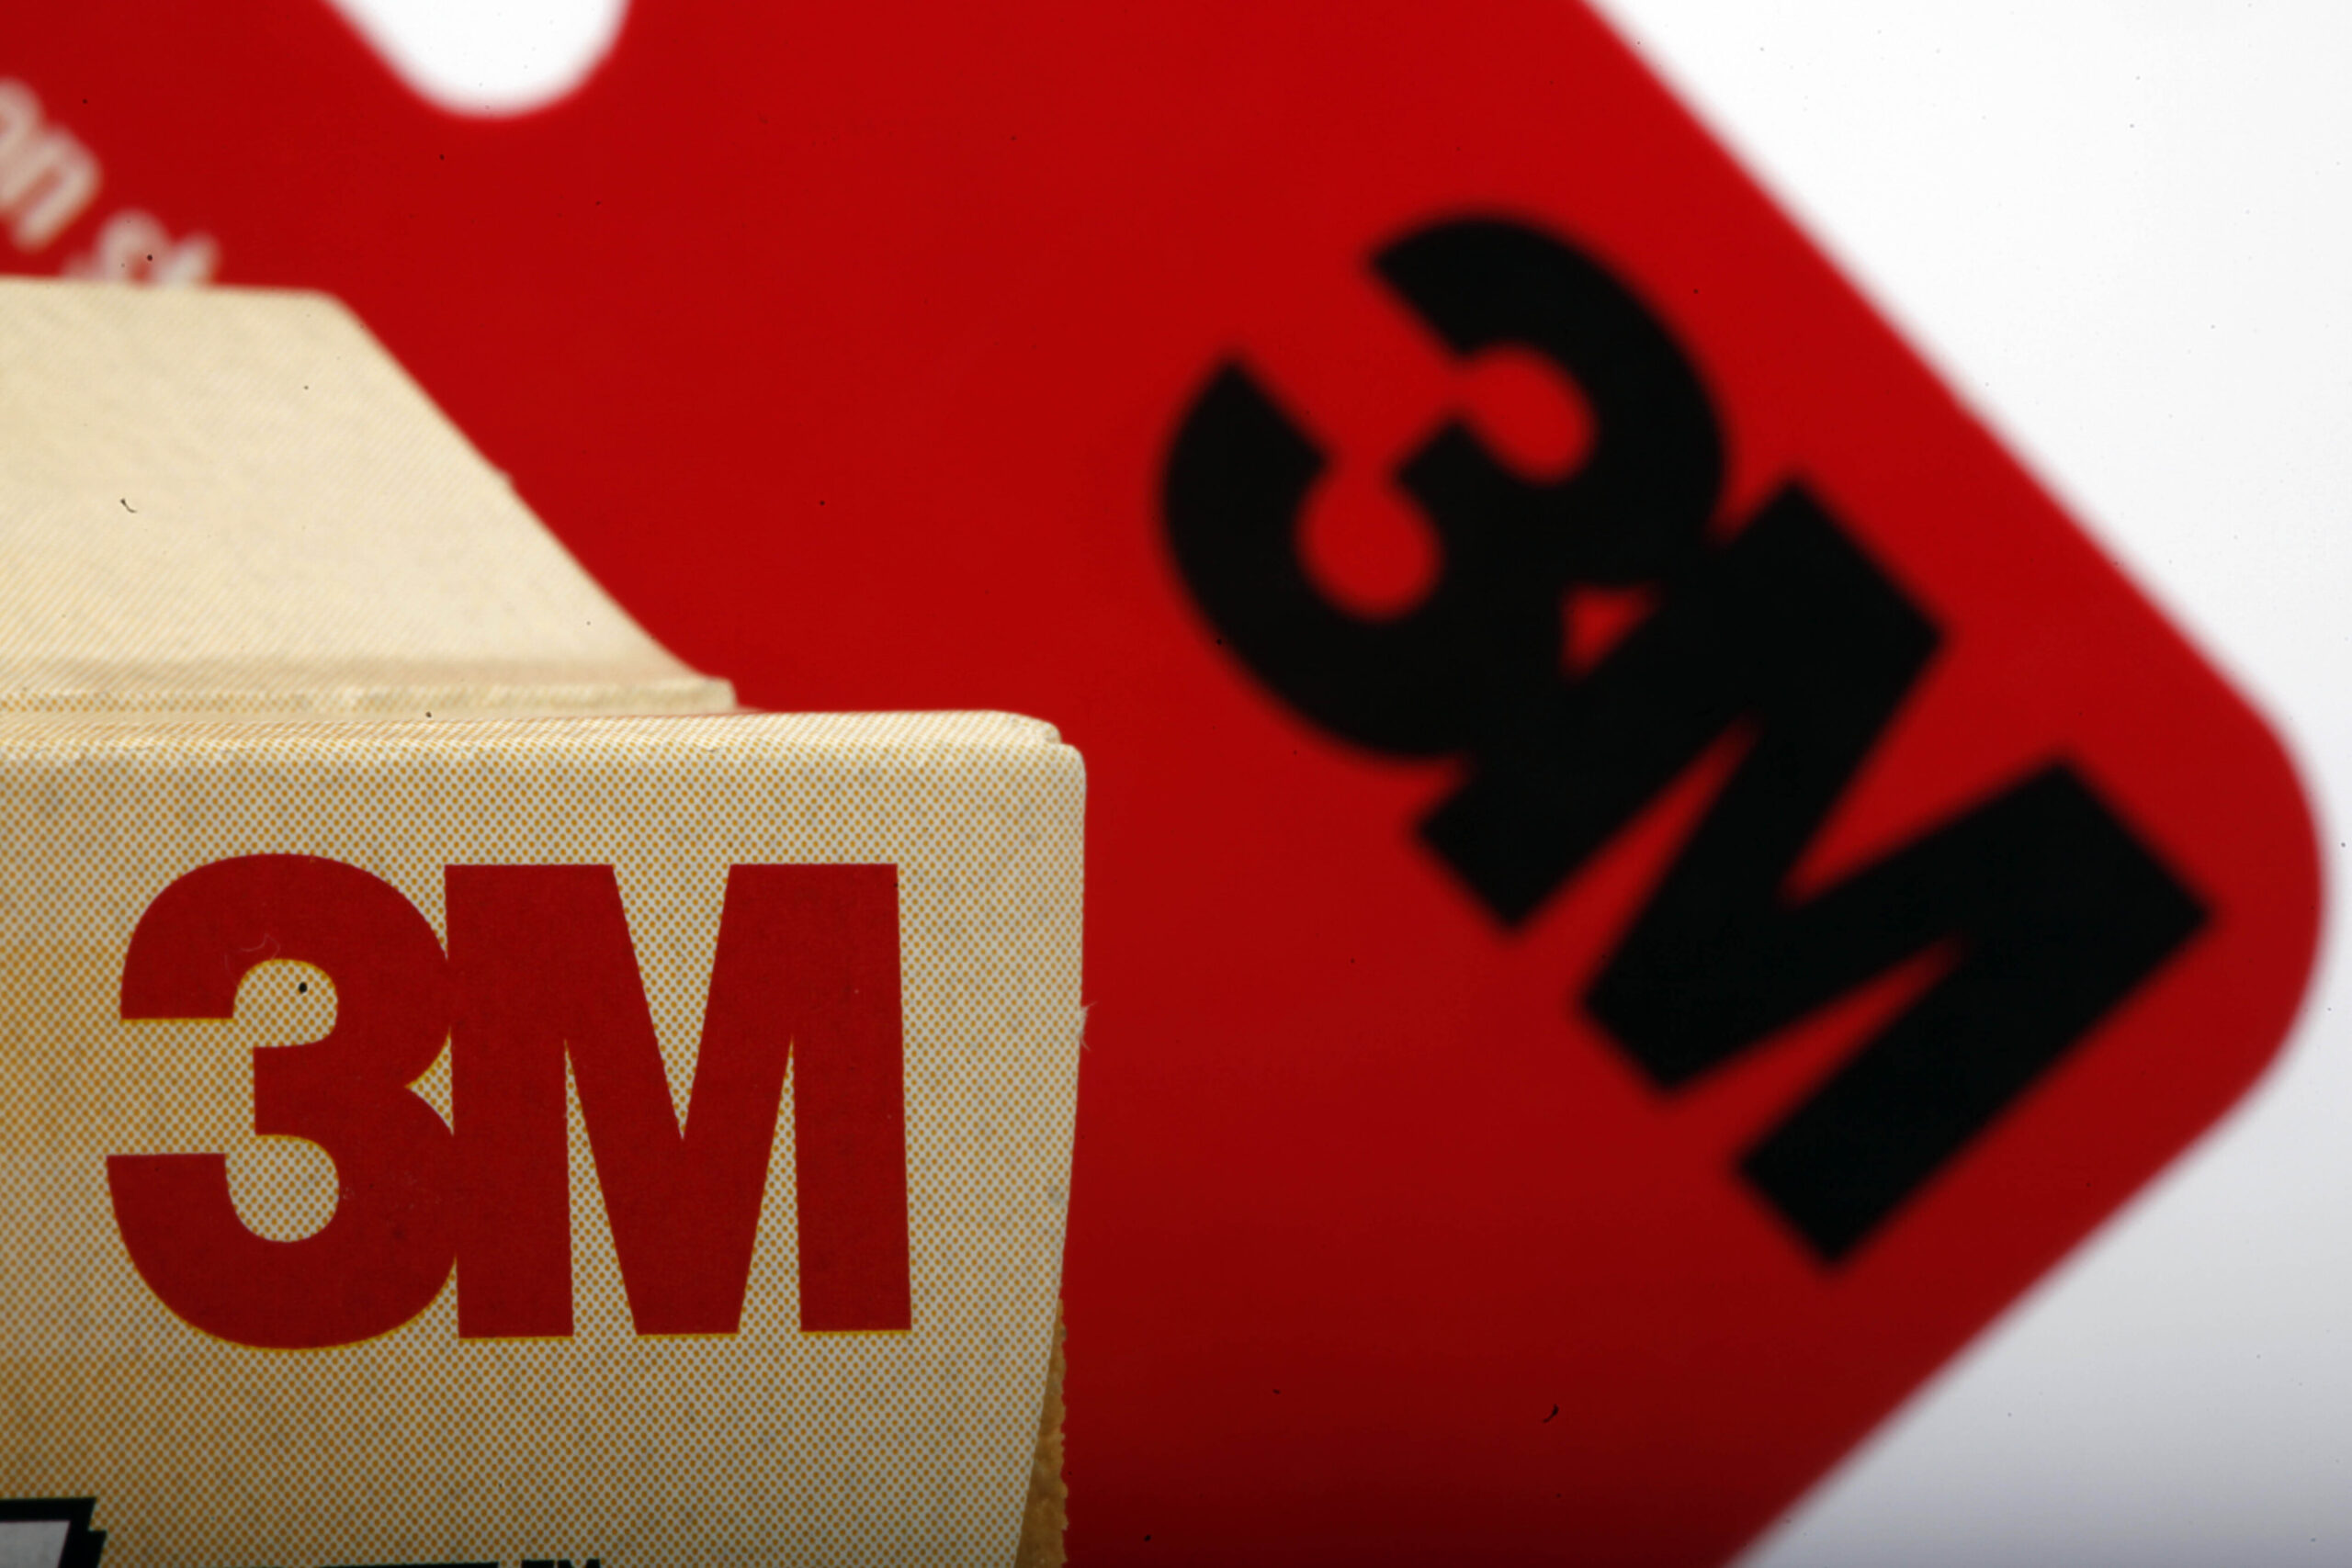 3M cited for safety violations following worker's death in